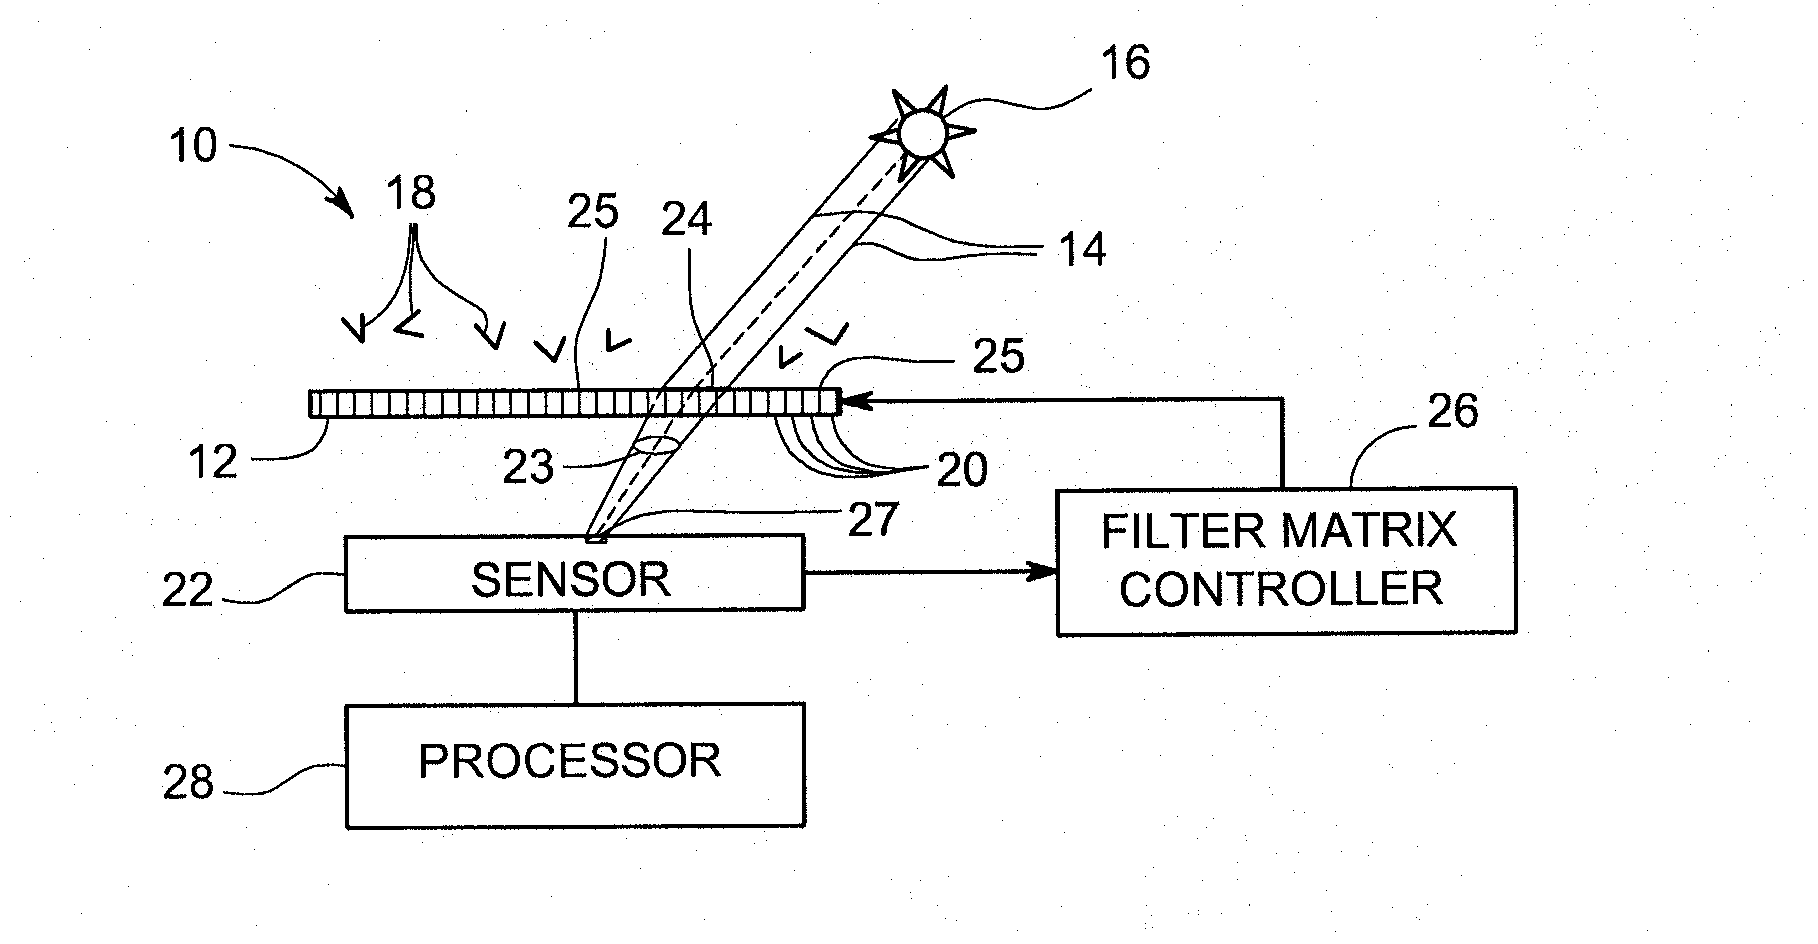 Apparatus having a controllable filter matrix to selectively acquire different components of solar irradiance